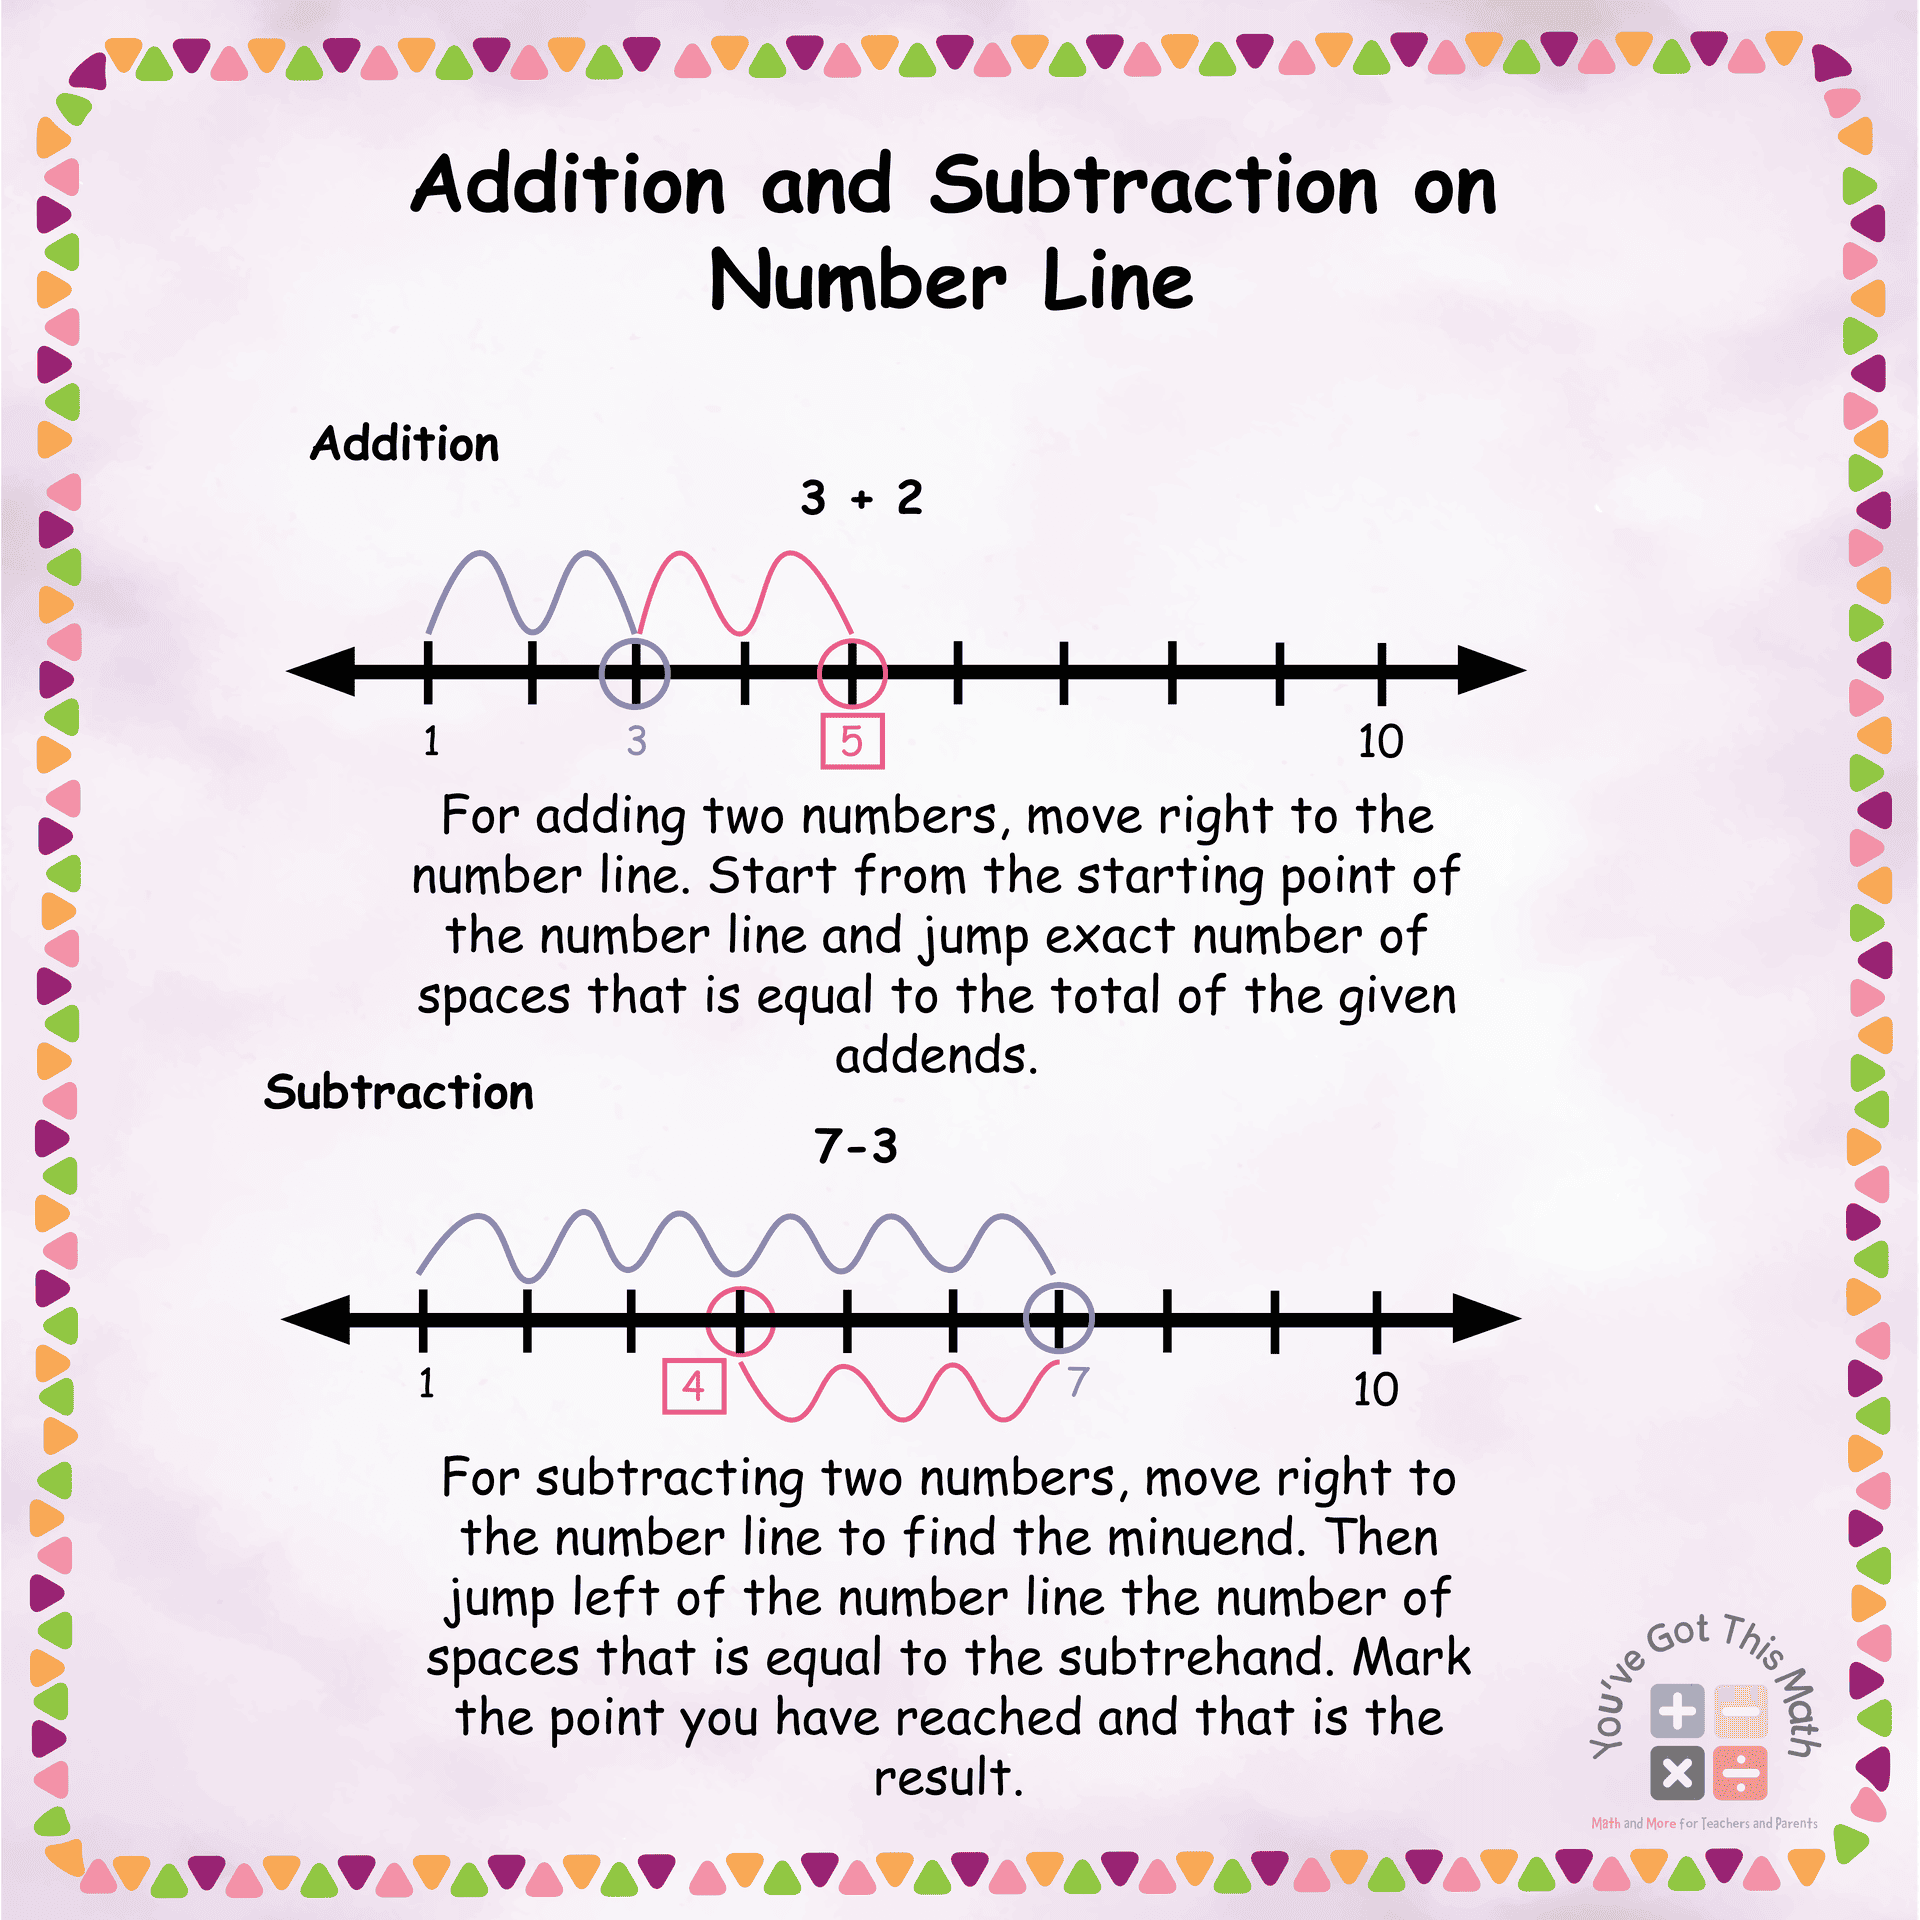 Addition and Subtraction on Number Line